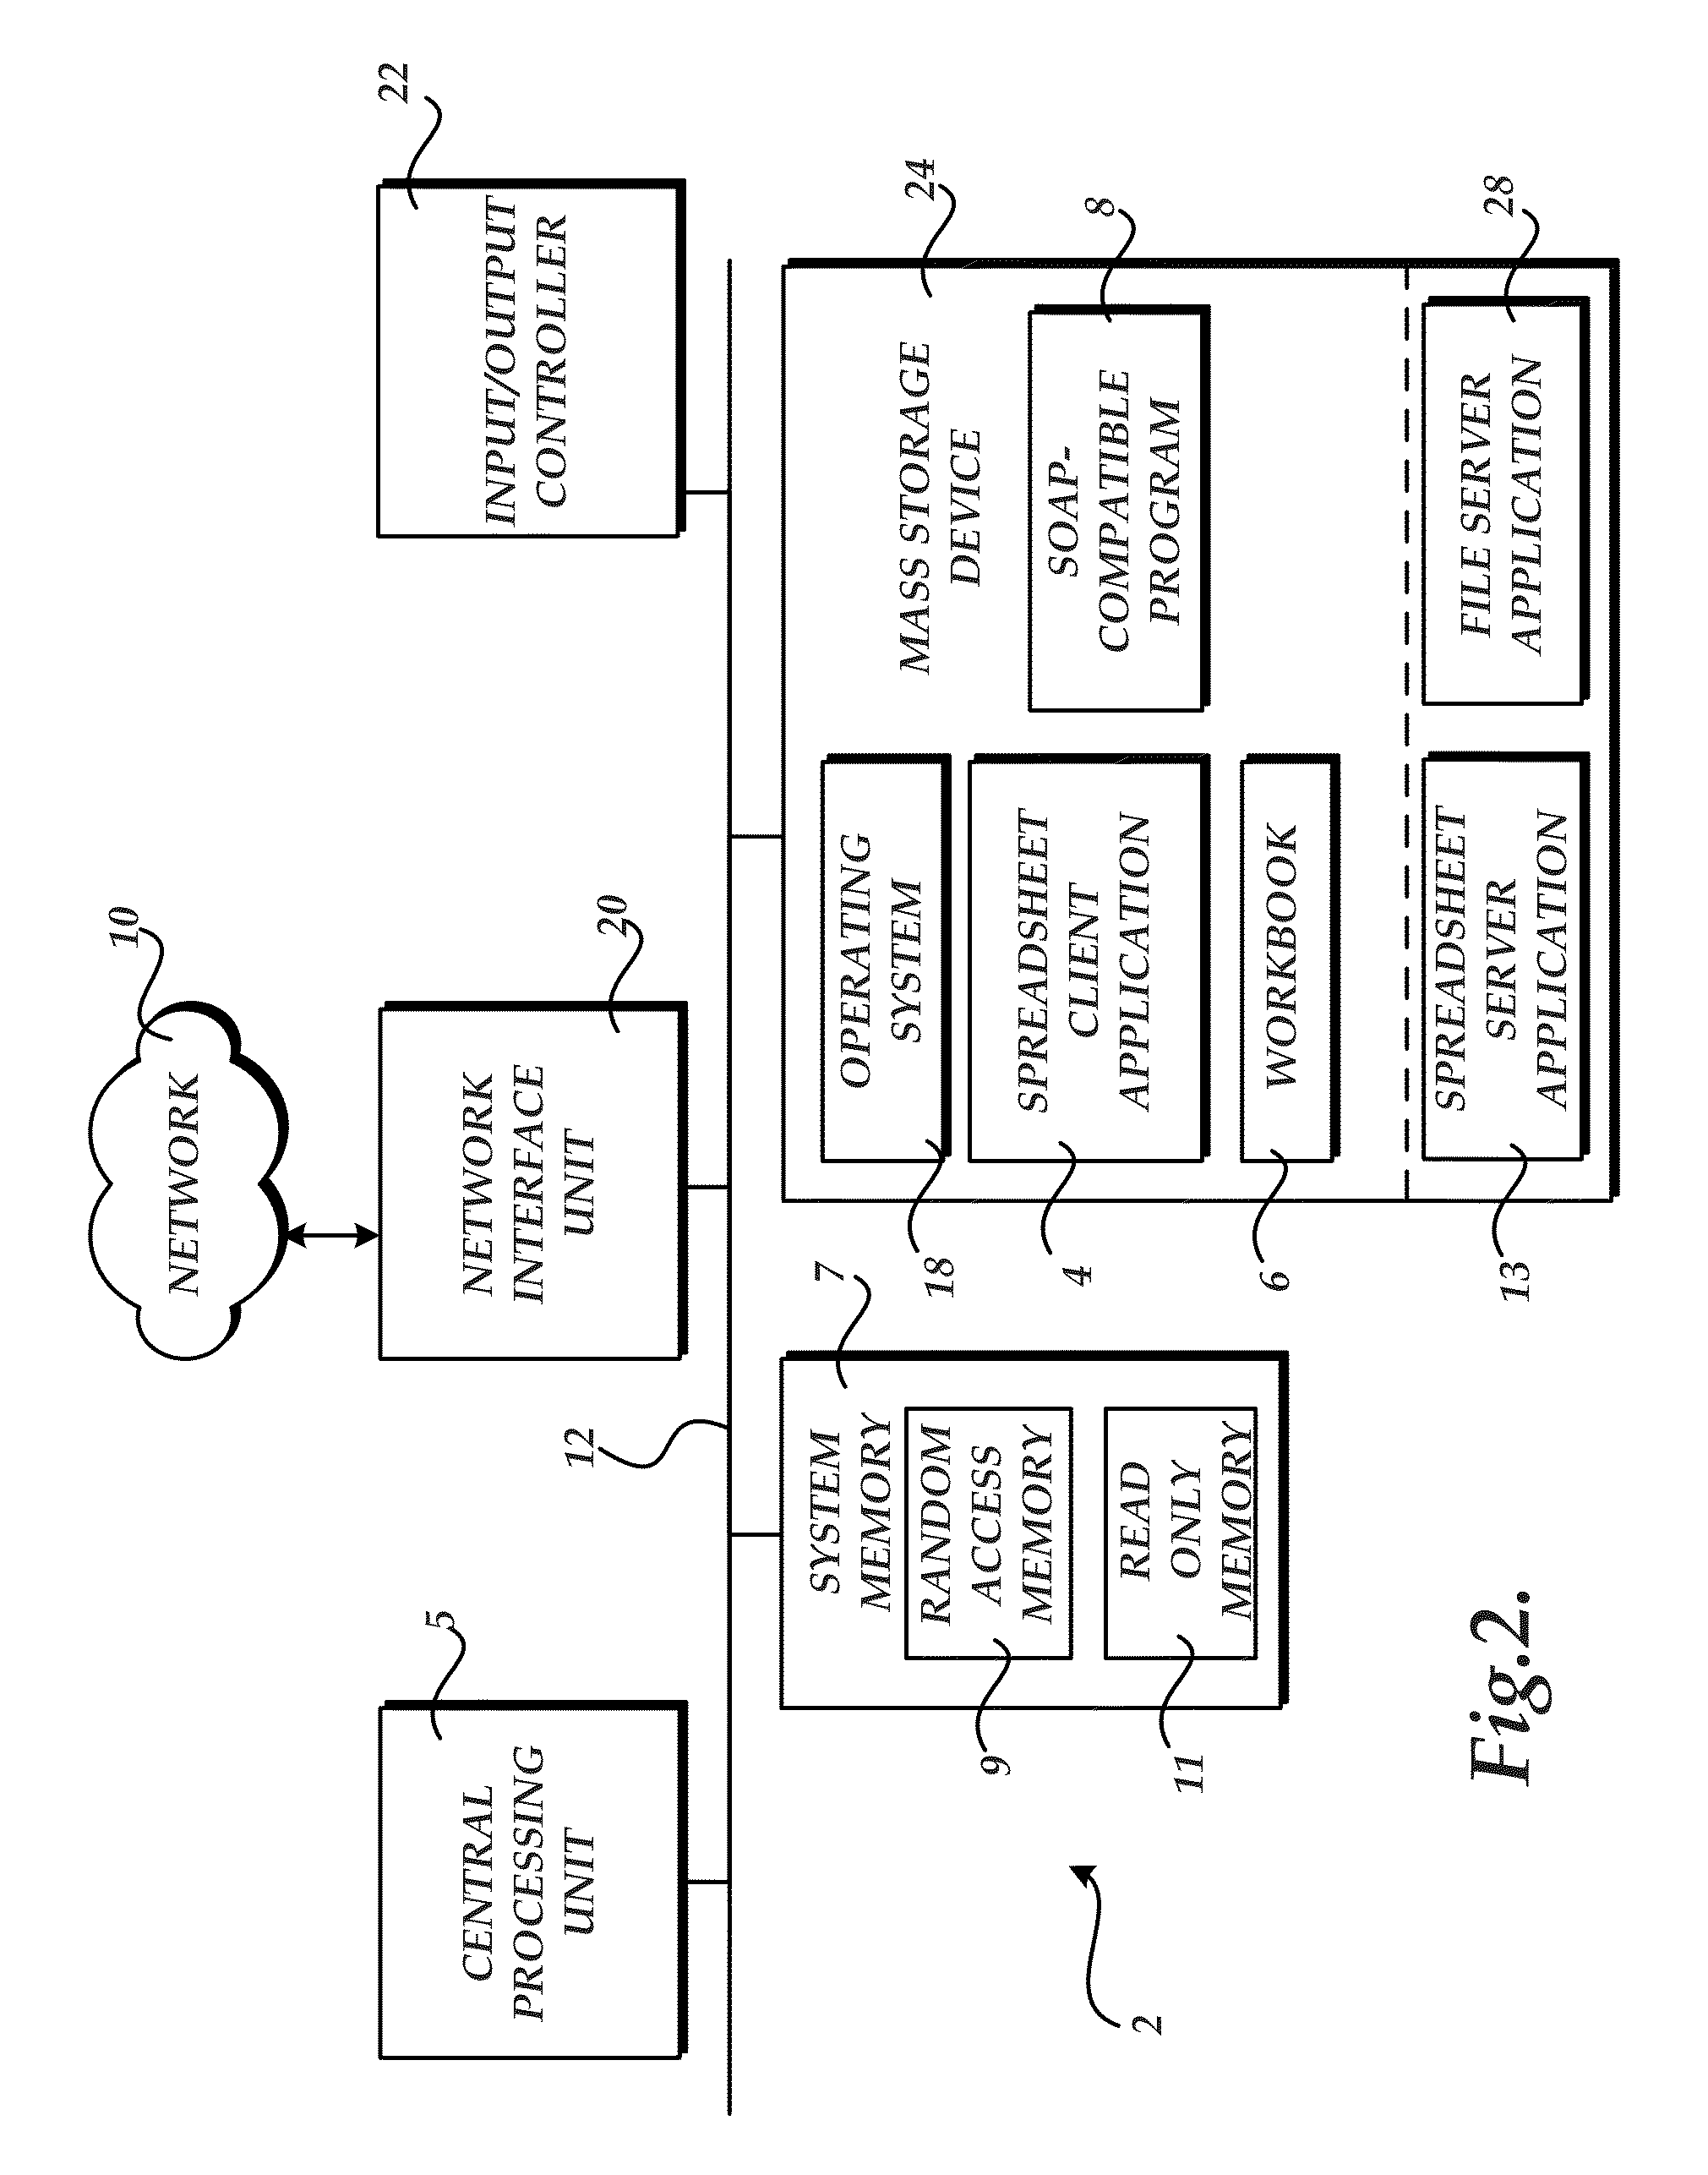 Method, System, and Apparatus for Providing Access to Workbook Models Through Remote Function Calls